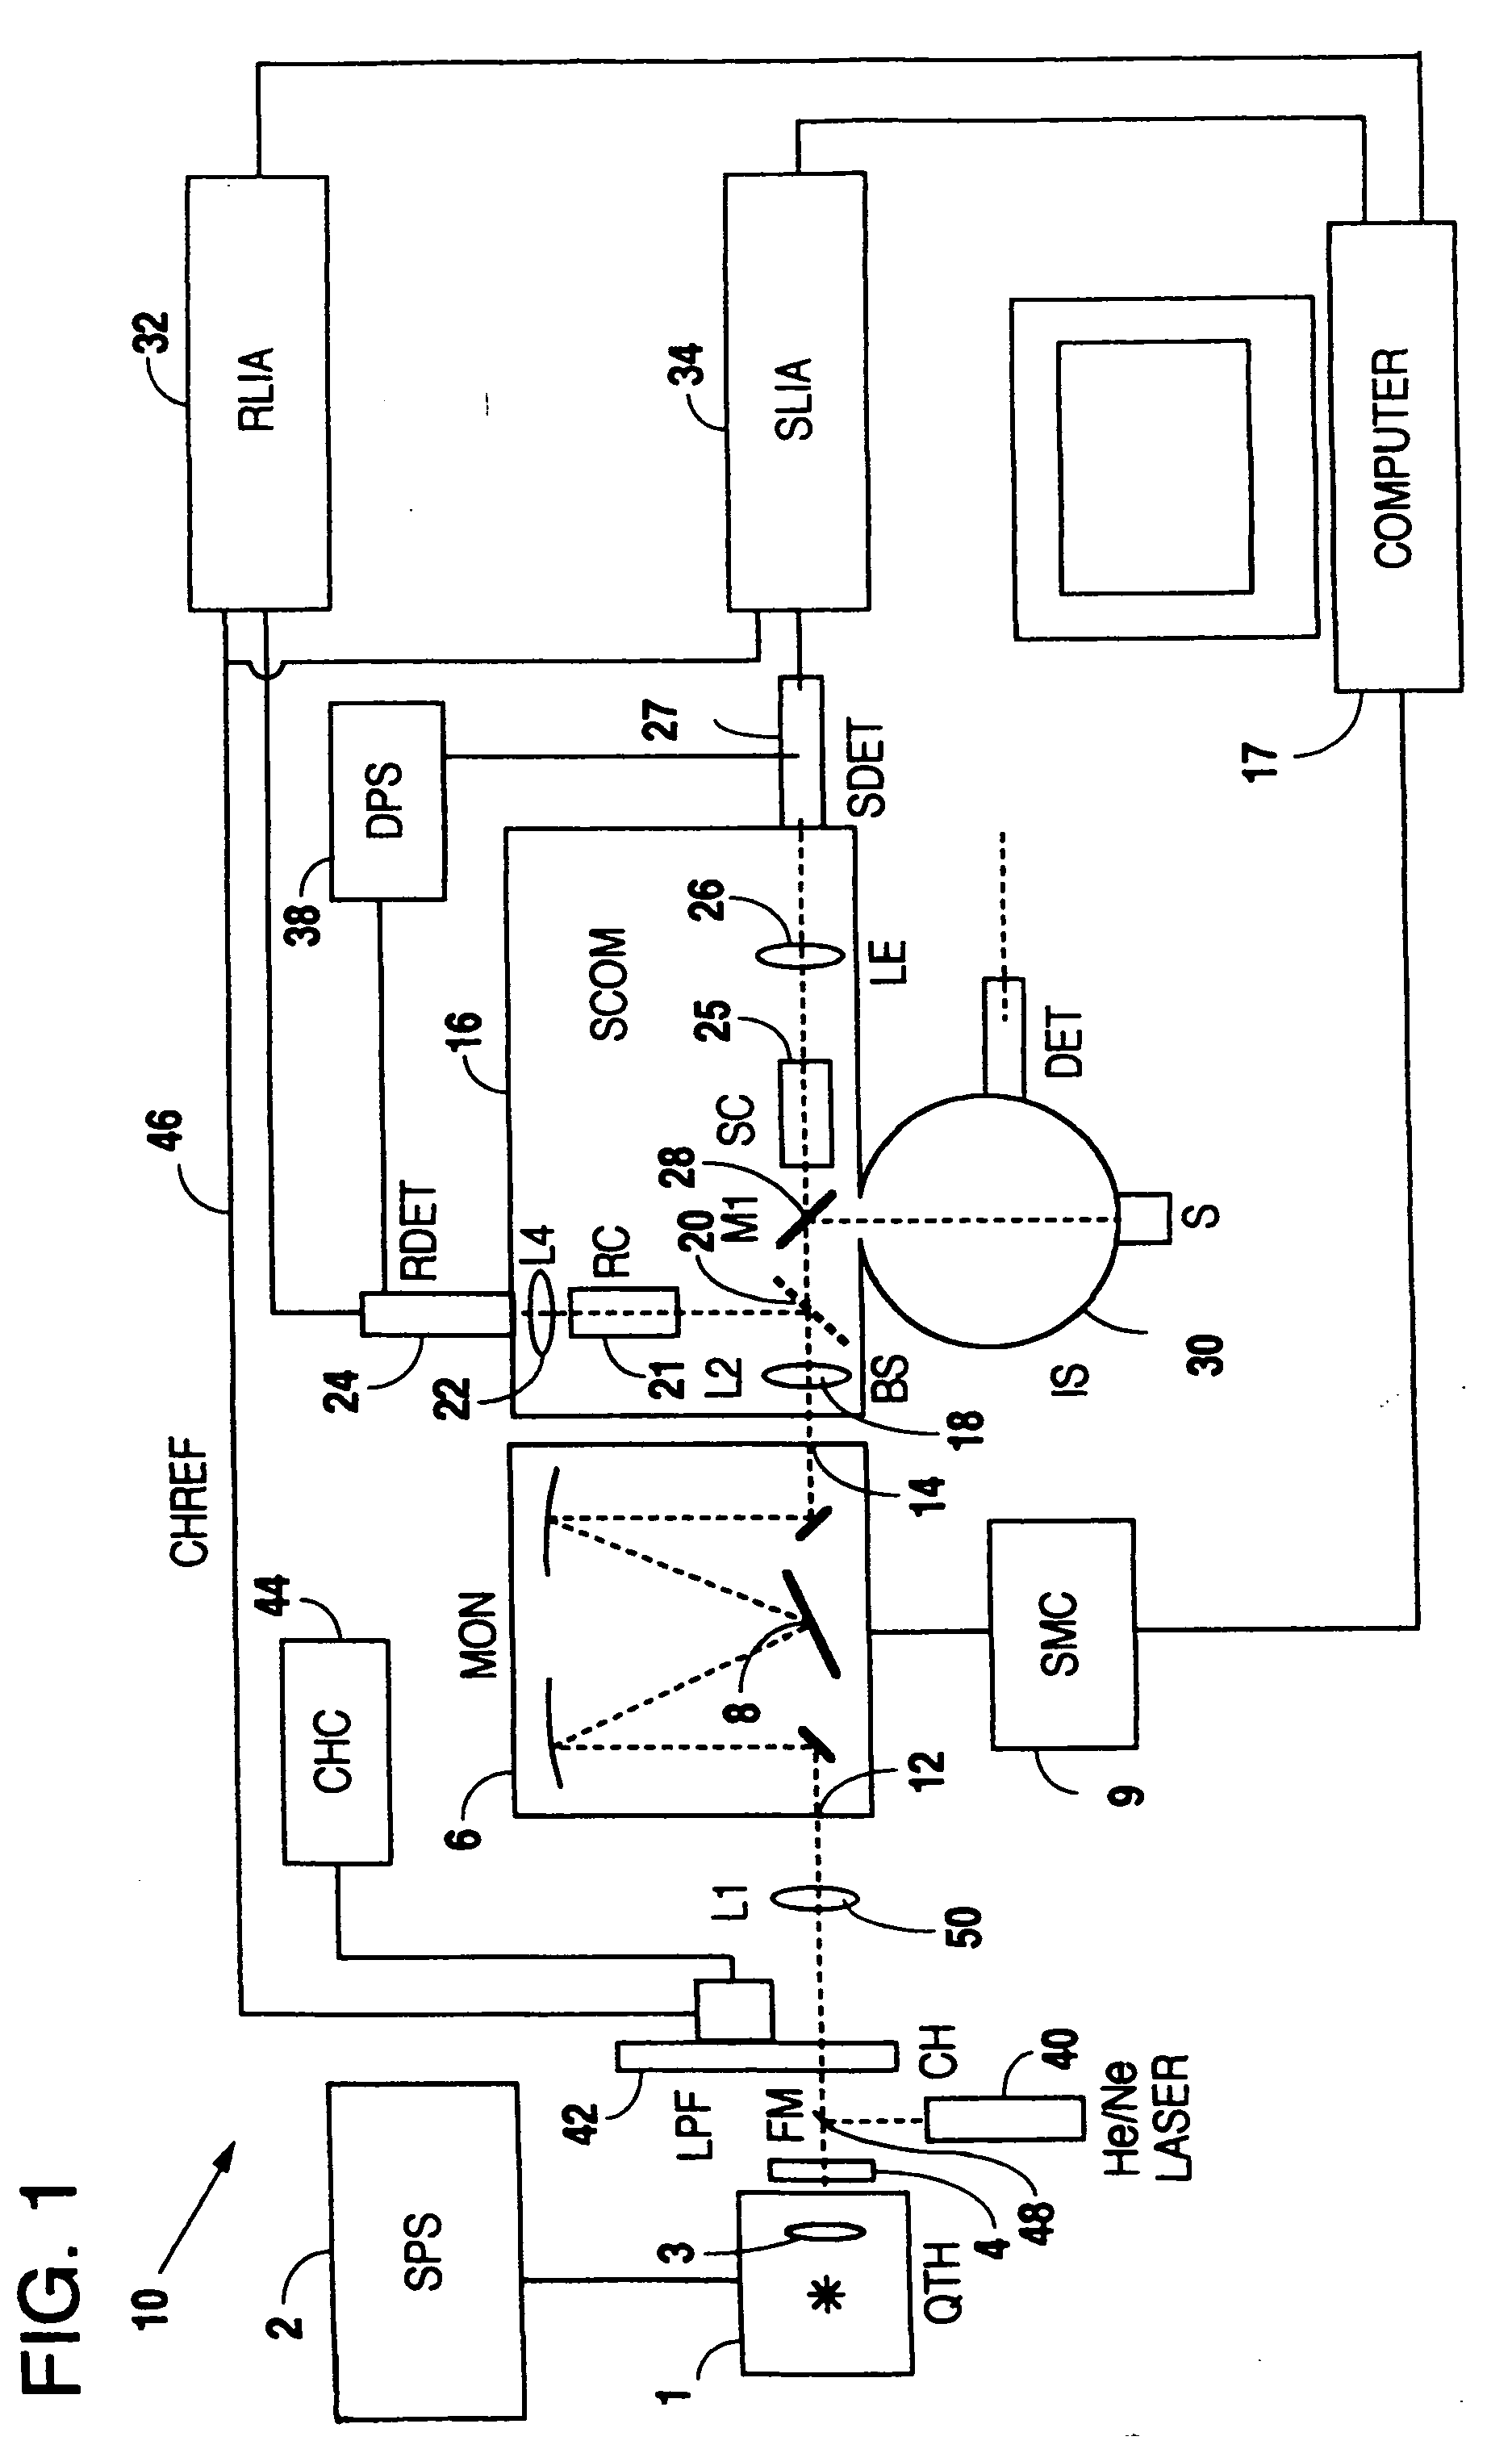 Dispersive near-infrared spectrometer with automatic wavelength calibration